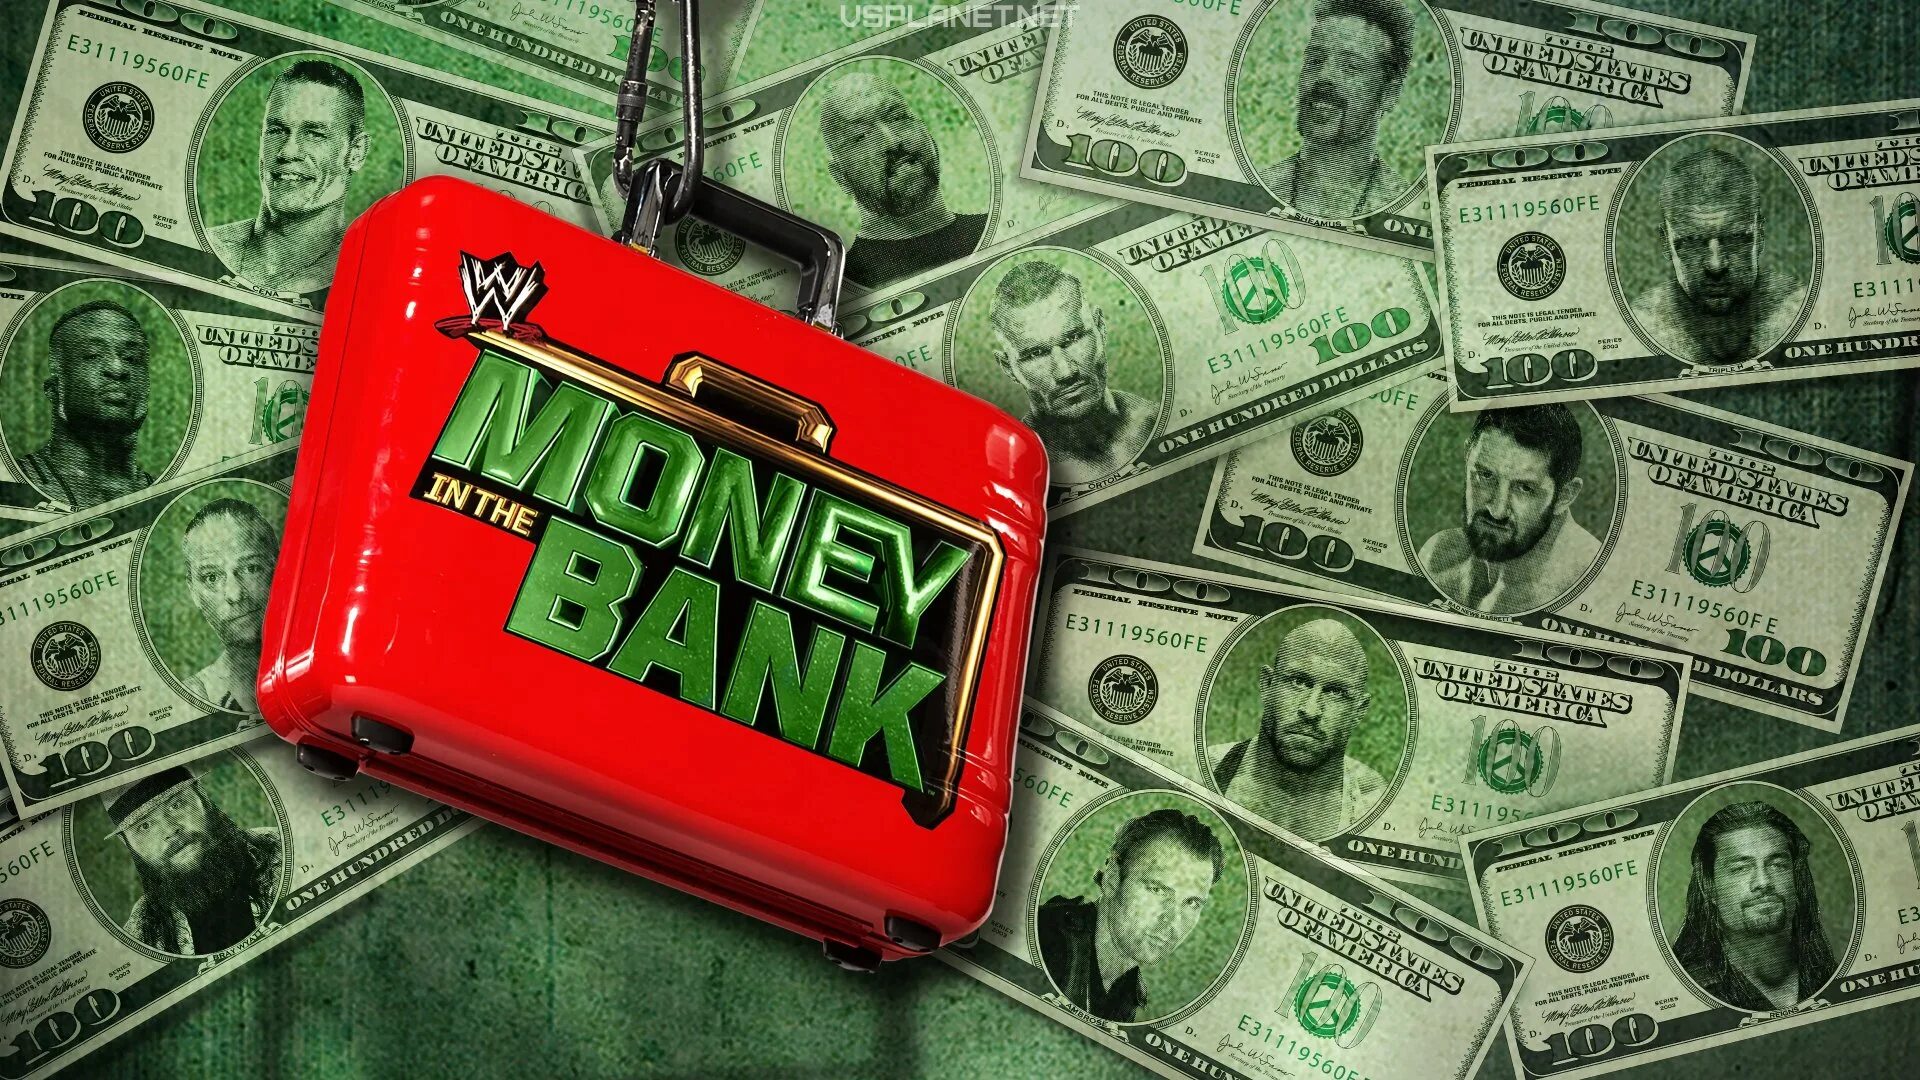 The bank is the shop. Money in the Bank Постер. WWE деньги. WWE money in the Bank. Банк деньги.